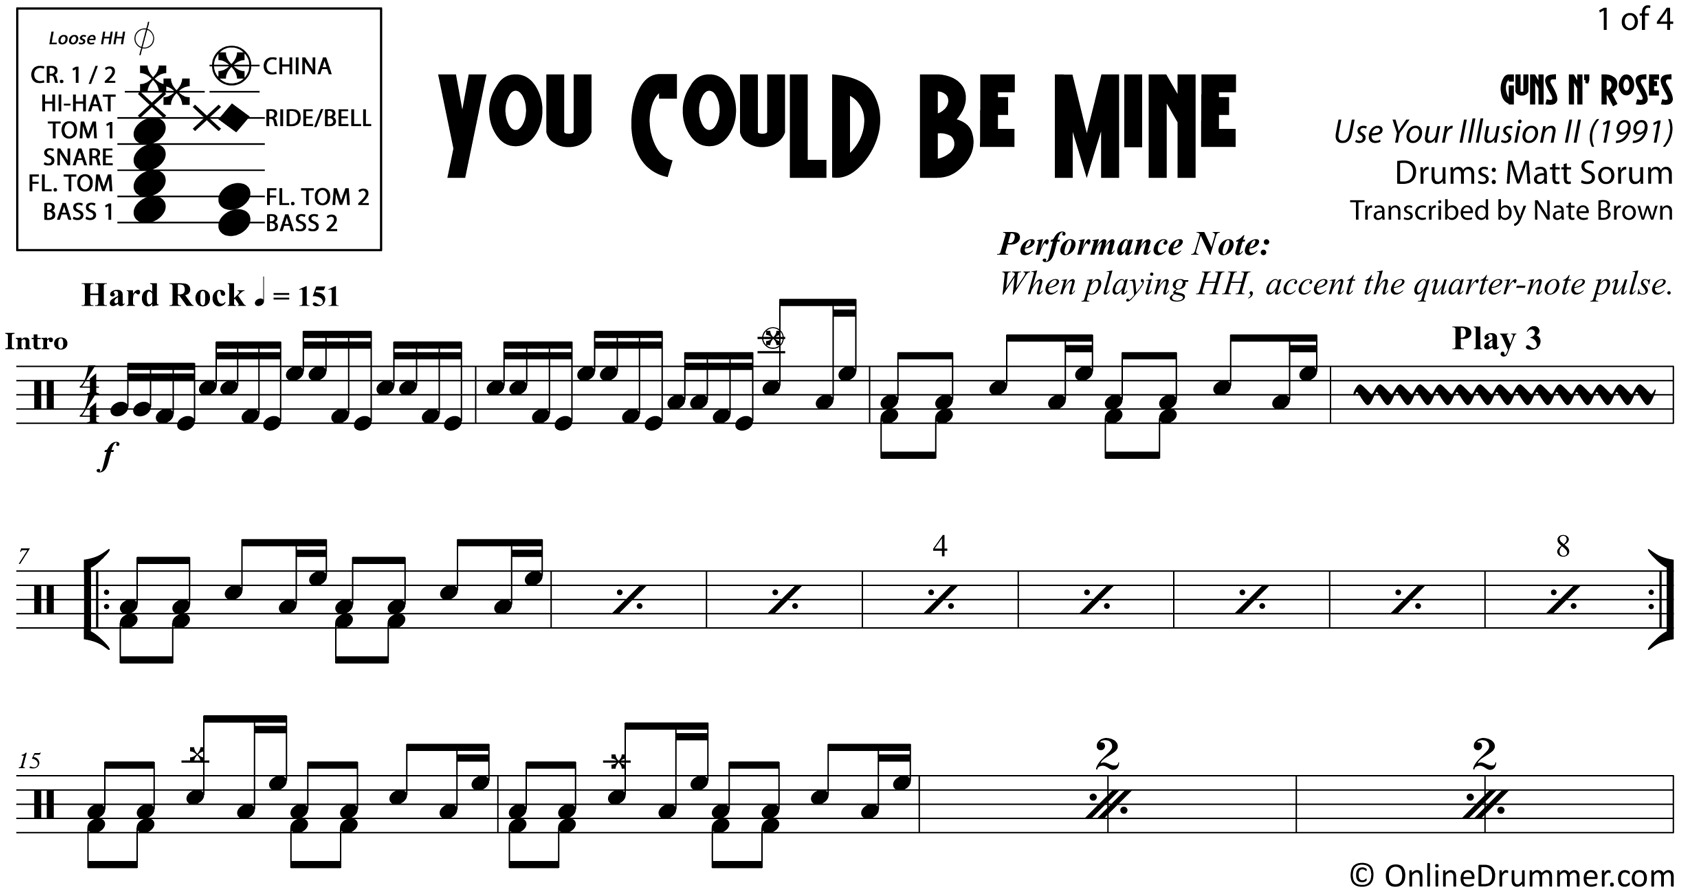 You Could Be Mine - Guns N Roses - Drum Sheet Music